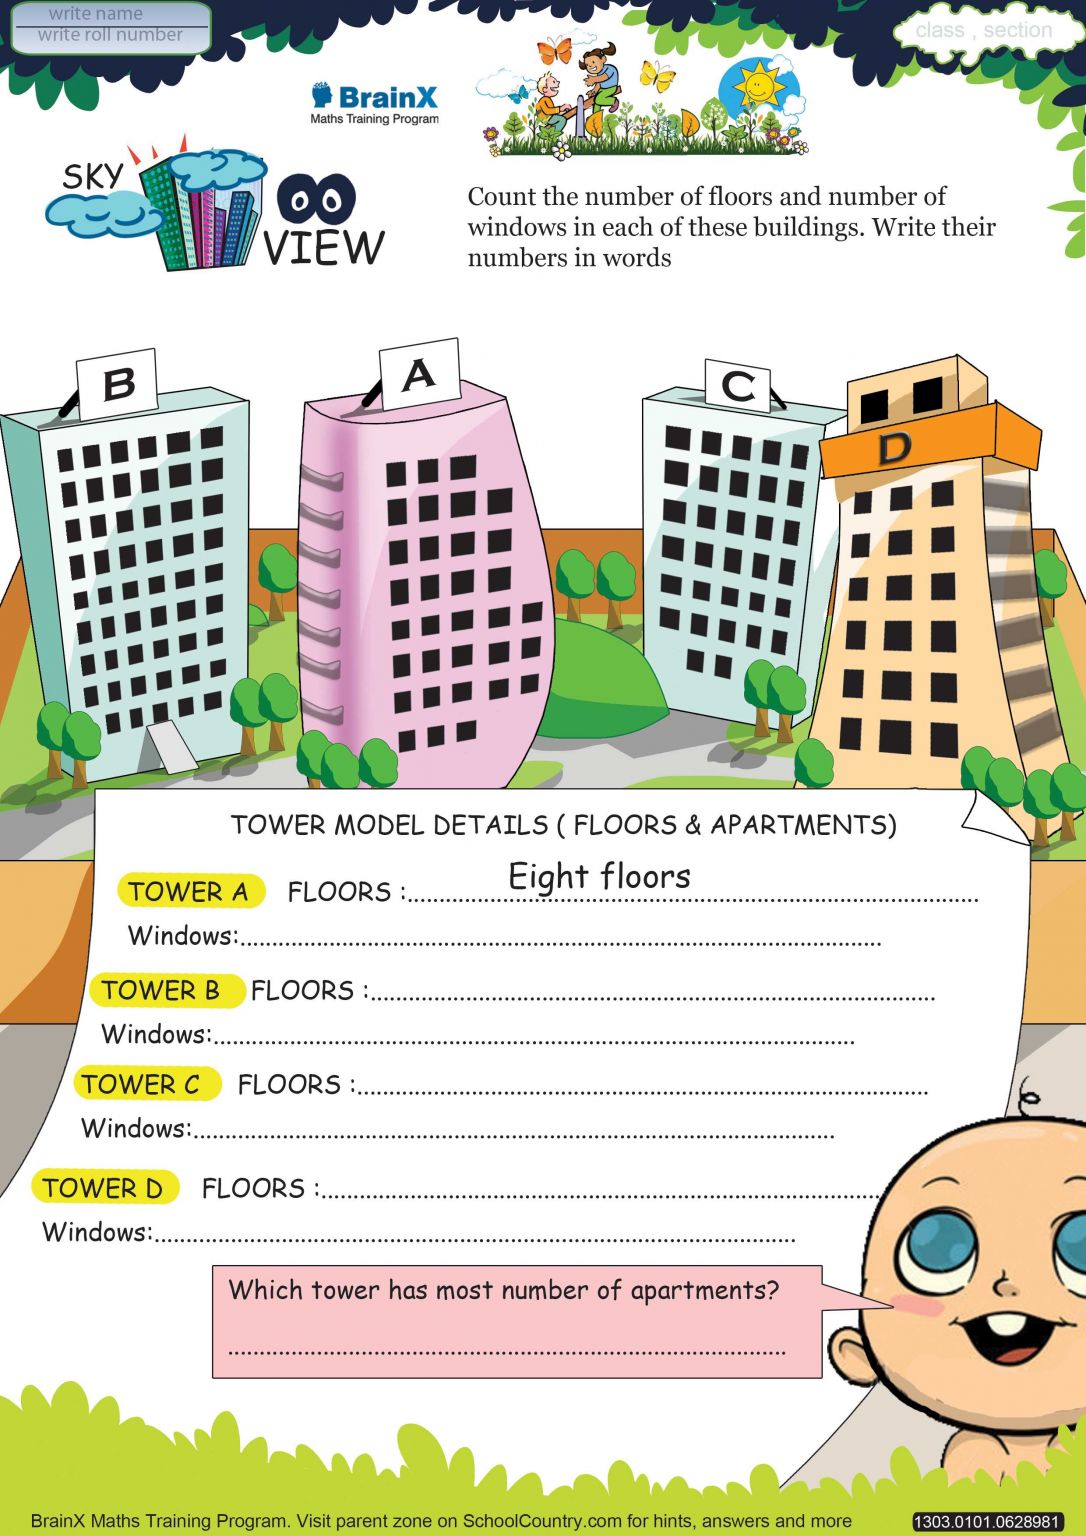 3-free-math-worksheets-first-grade-1-addition-add-two-2-digit-numbers-in-columns-no-regrouping-amp